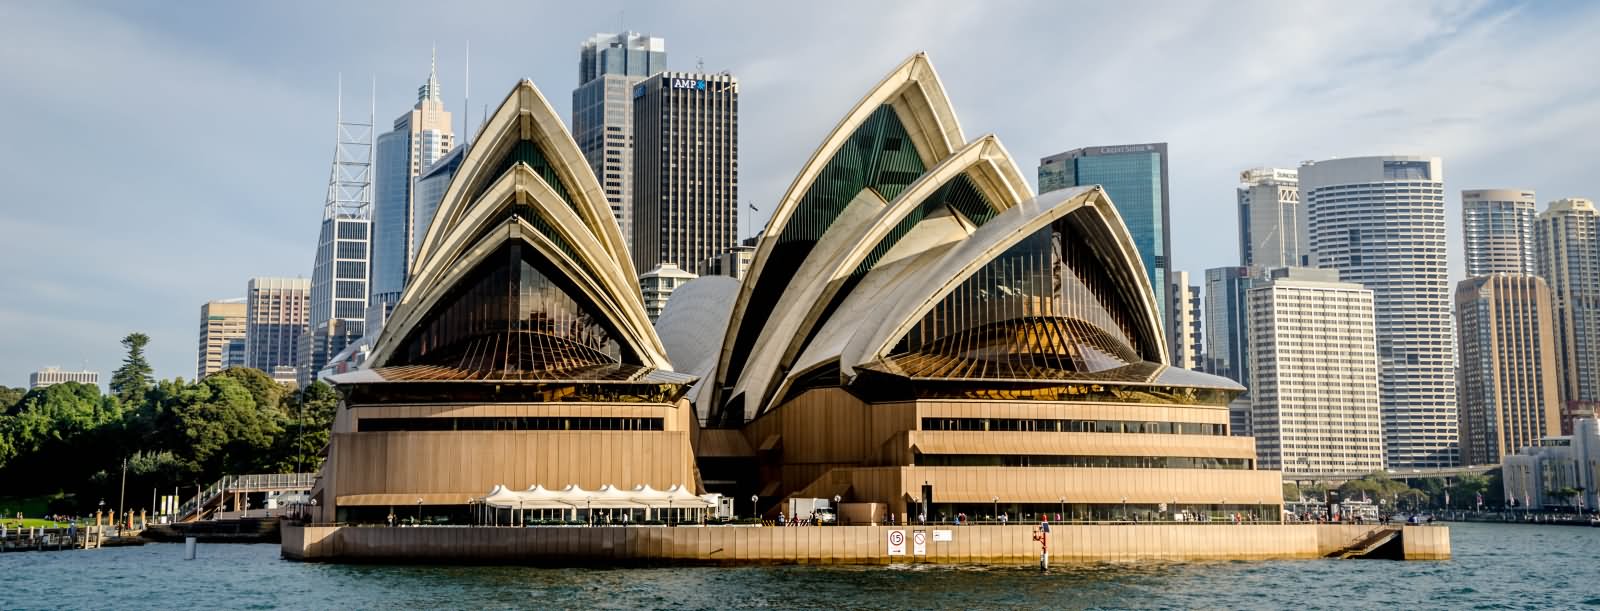 Front View Of Sydney Opera House